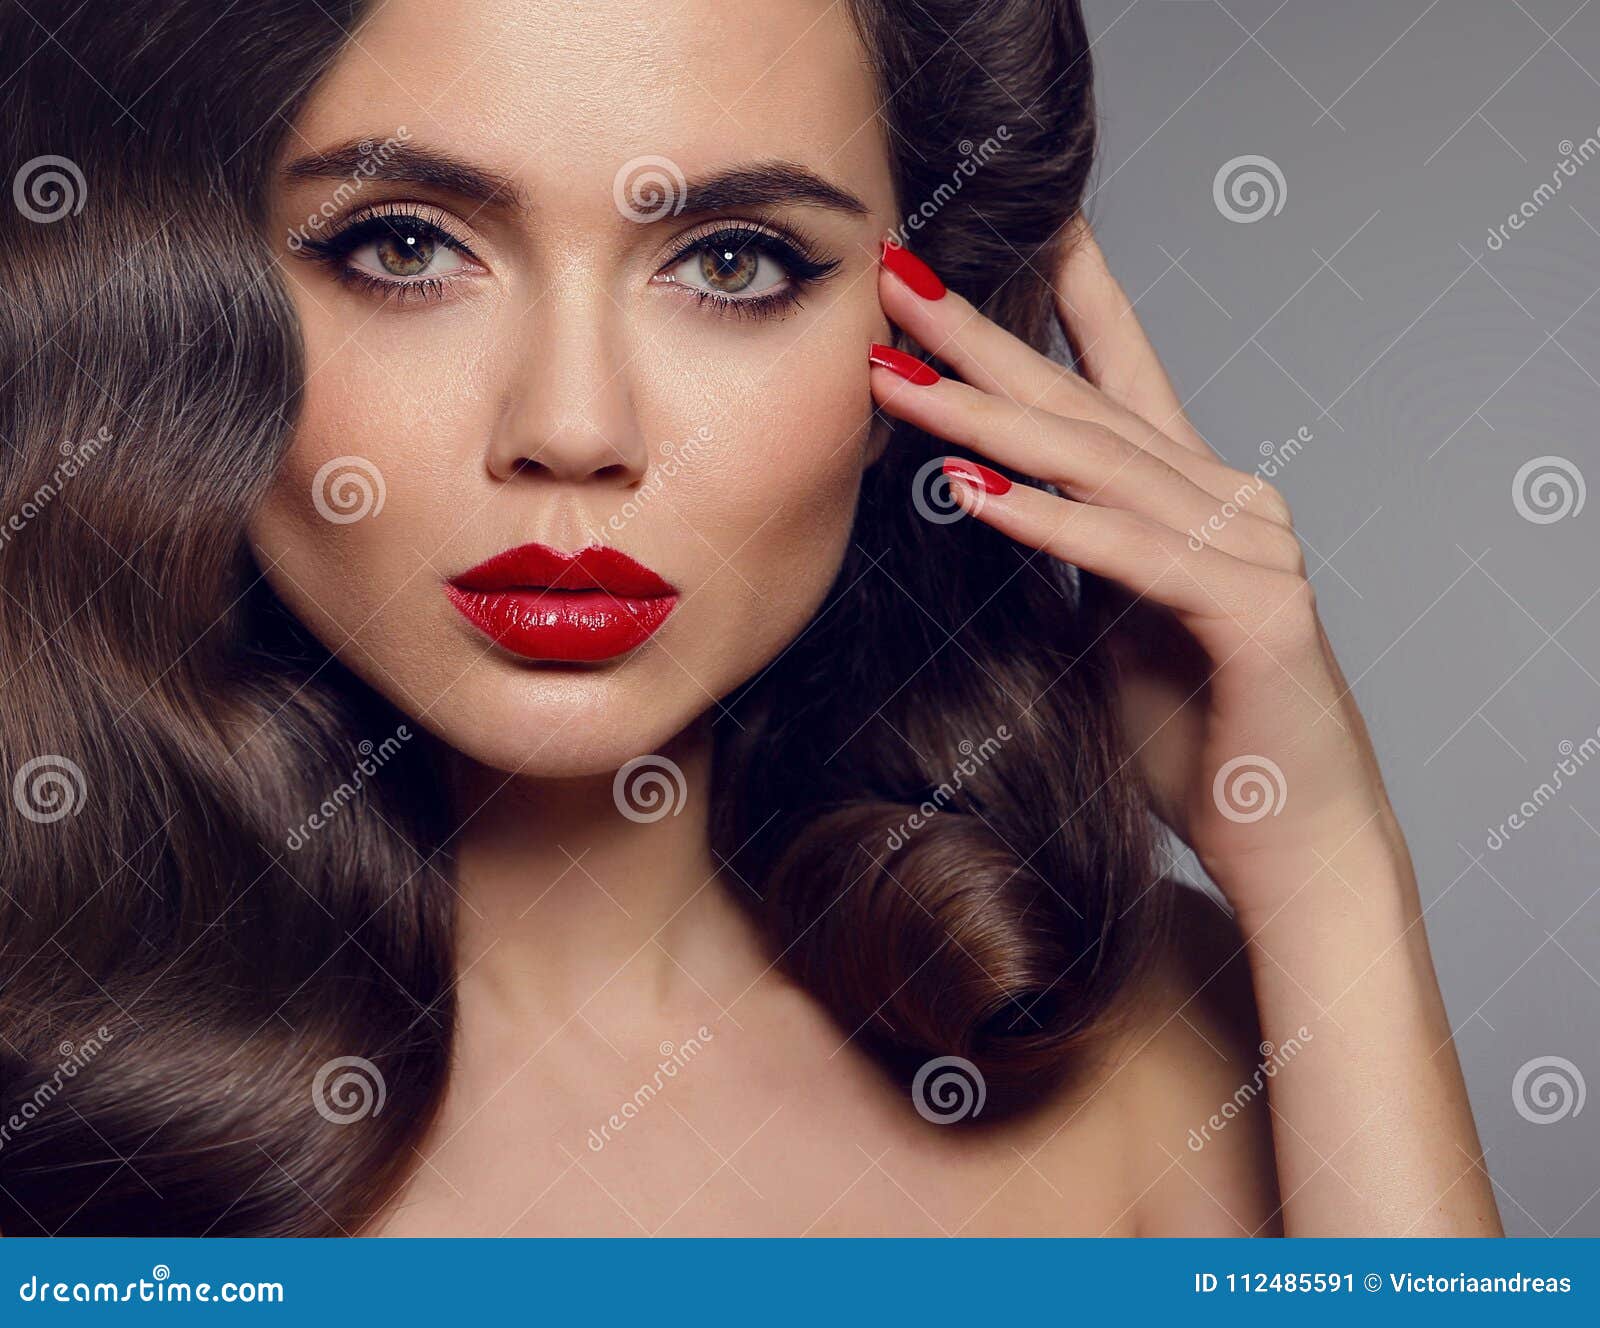 Beauty Makeup Elegant Woman Portrait With Red Lips And Manicured Nails Healthy Wavy Hair Style 